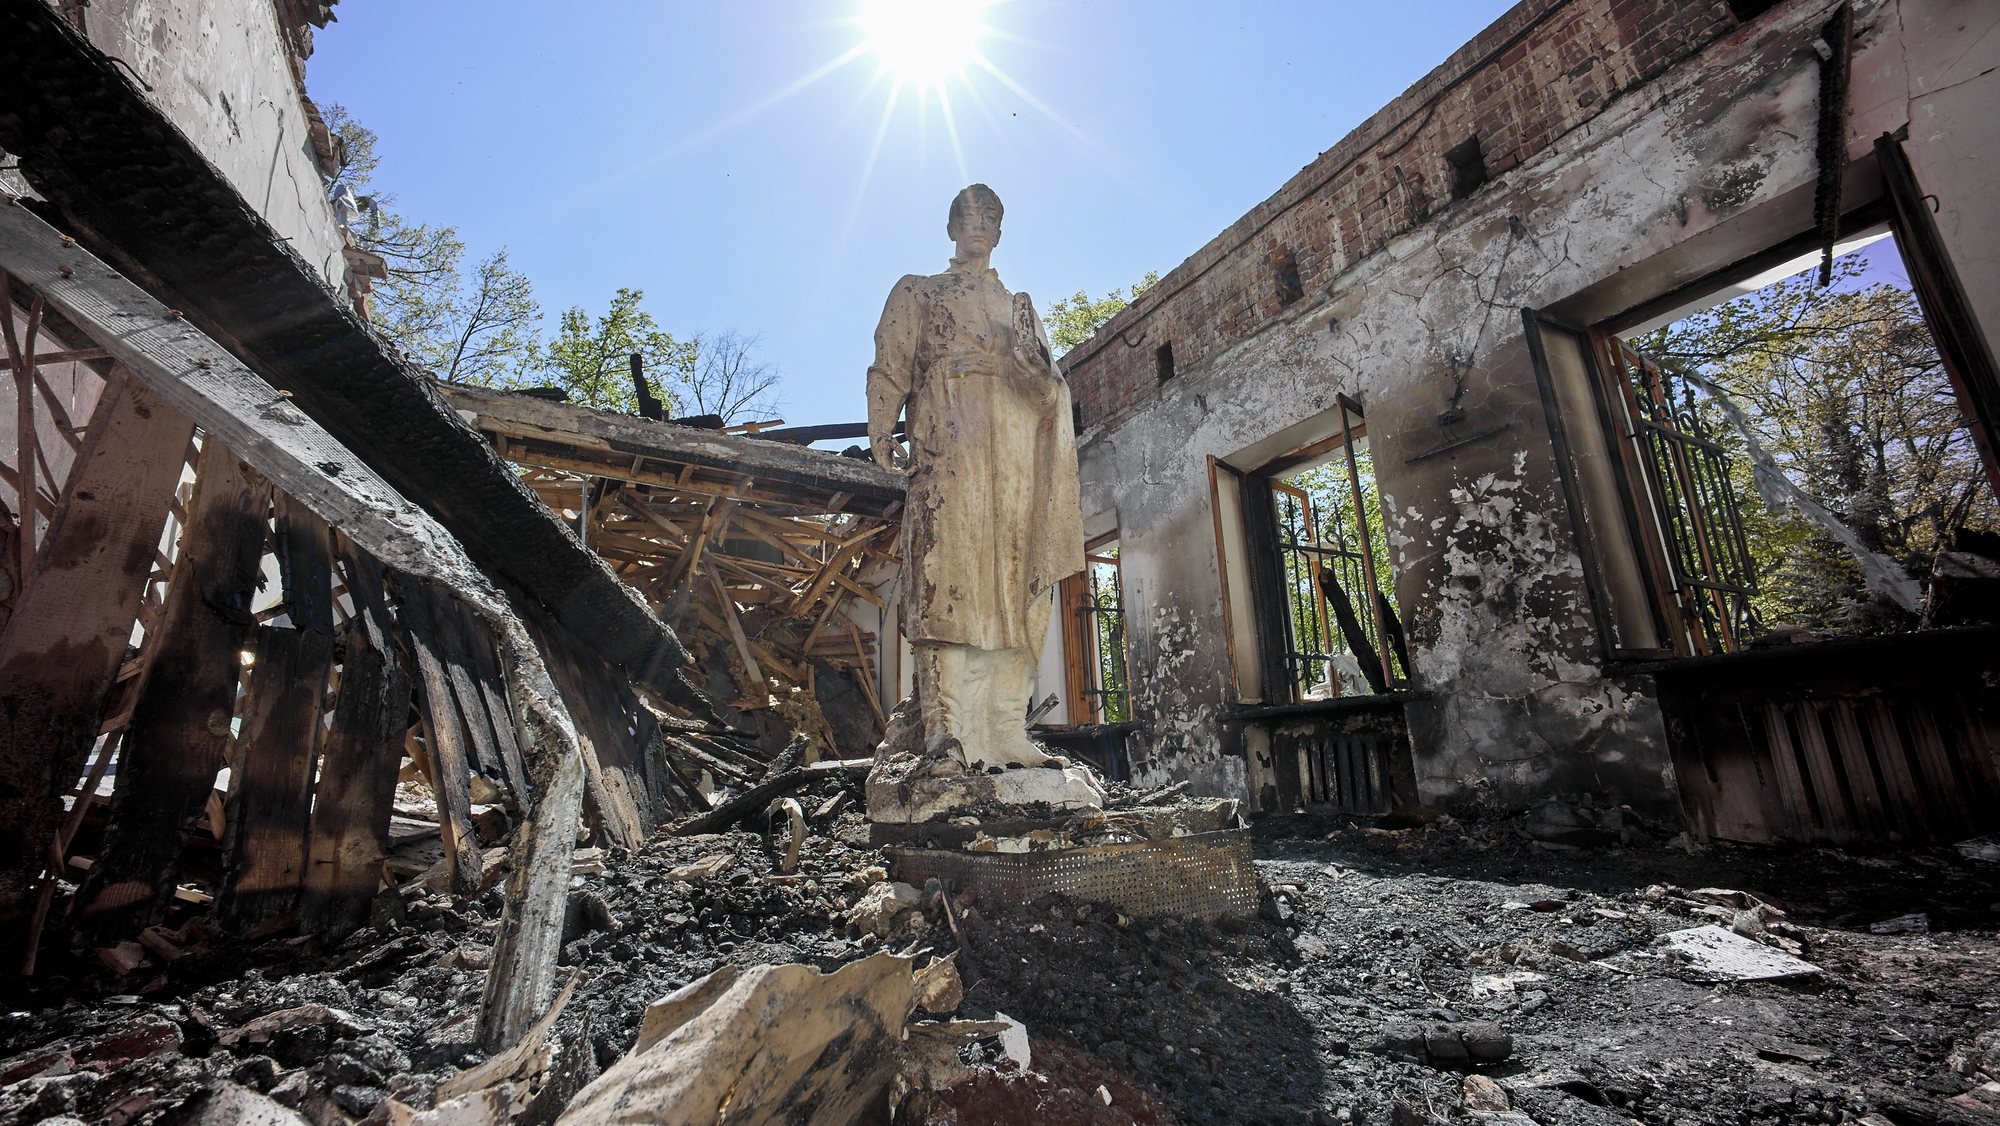 epaselect epa09931872 A view of the statue of Ukrainian philosopher Hryhoriy Skovoroda standing in the damaged Hryhoriy Skovoroda Literary Memorial Museum after shelling in Skovorodynivka village near Kharkiv, Ukraine, 07 May 2022. Skovoroda, a famous philosopher and poet of the 18th century, spent the last years of his life in the estate of local landlords in the village of Ivanovka, which was later renamed in his honor, Skovorodynivka. Russian troops entered Ukraine on 24 February, resulting in fighting and destruction in the country and fears of shortages in energy and food products globally. According to data released by the United Nations High Commission for the Refugees (UNHCR) on 06 May, over 5.8 million refugees have fled Ukraine seeking safety, protection and assistance in neighboring countries, making this the fastest growing refugee crisis since World War II. Western countries have responded with various sets of sanctions against Russian state majority owned companies and interests in a bid to bring an end to the conflict.  EPA/SERGEY KOZLOV